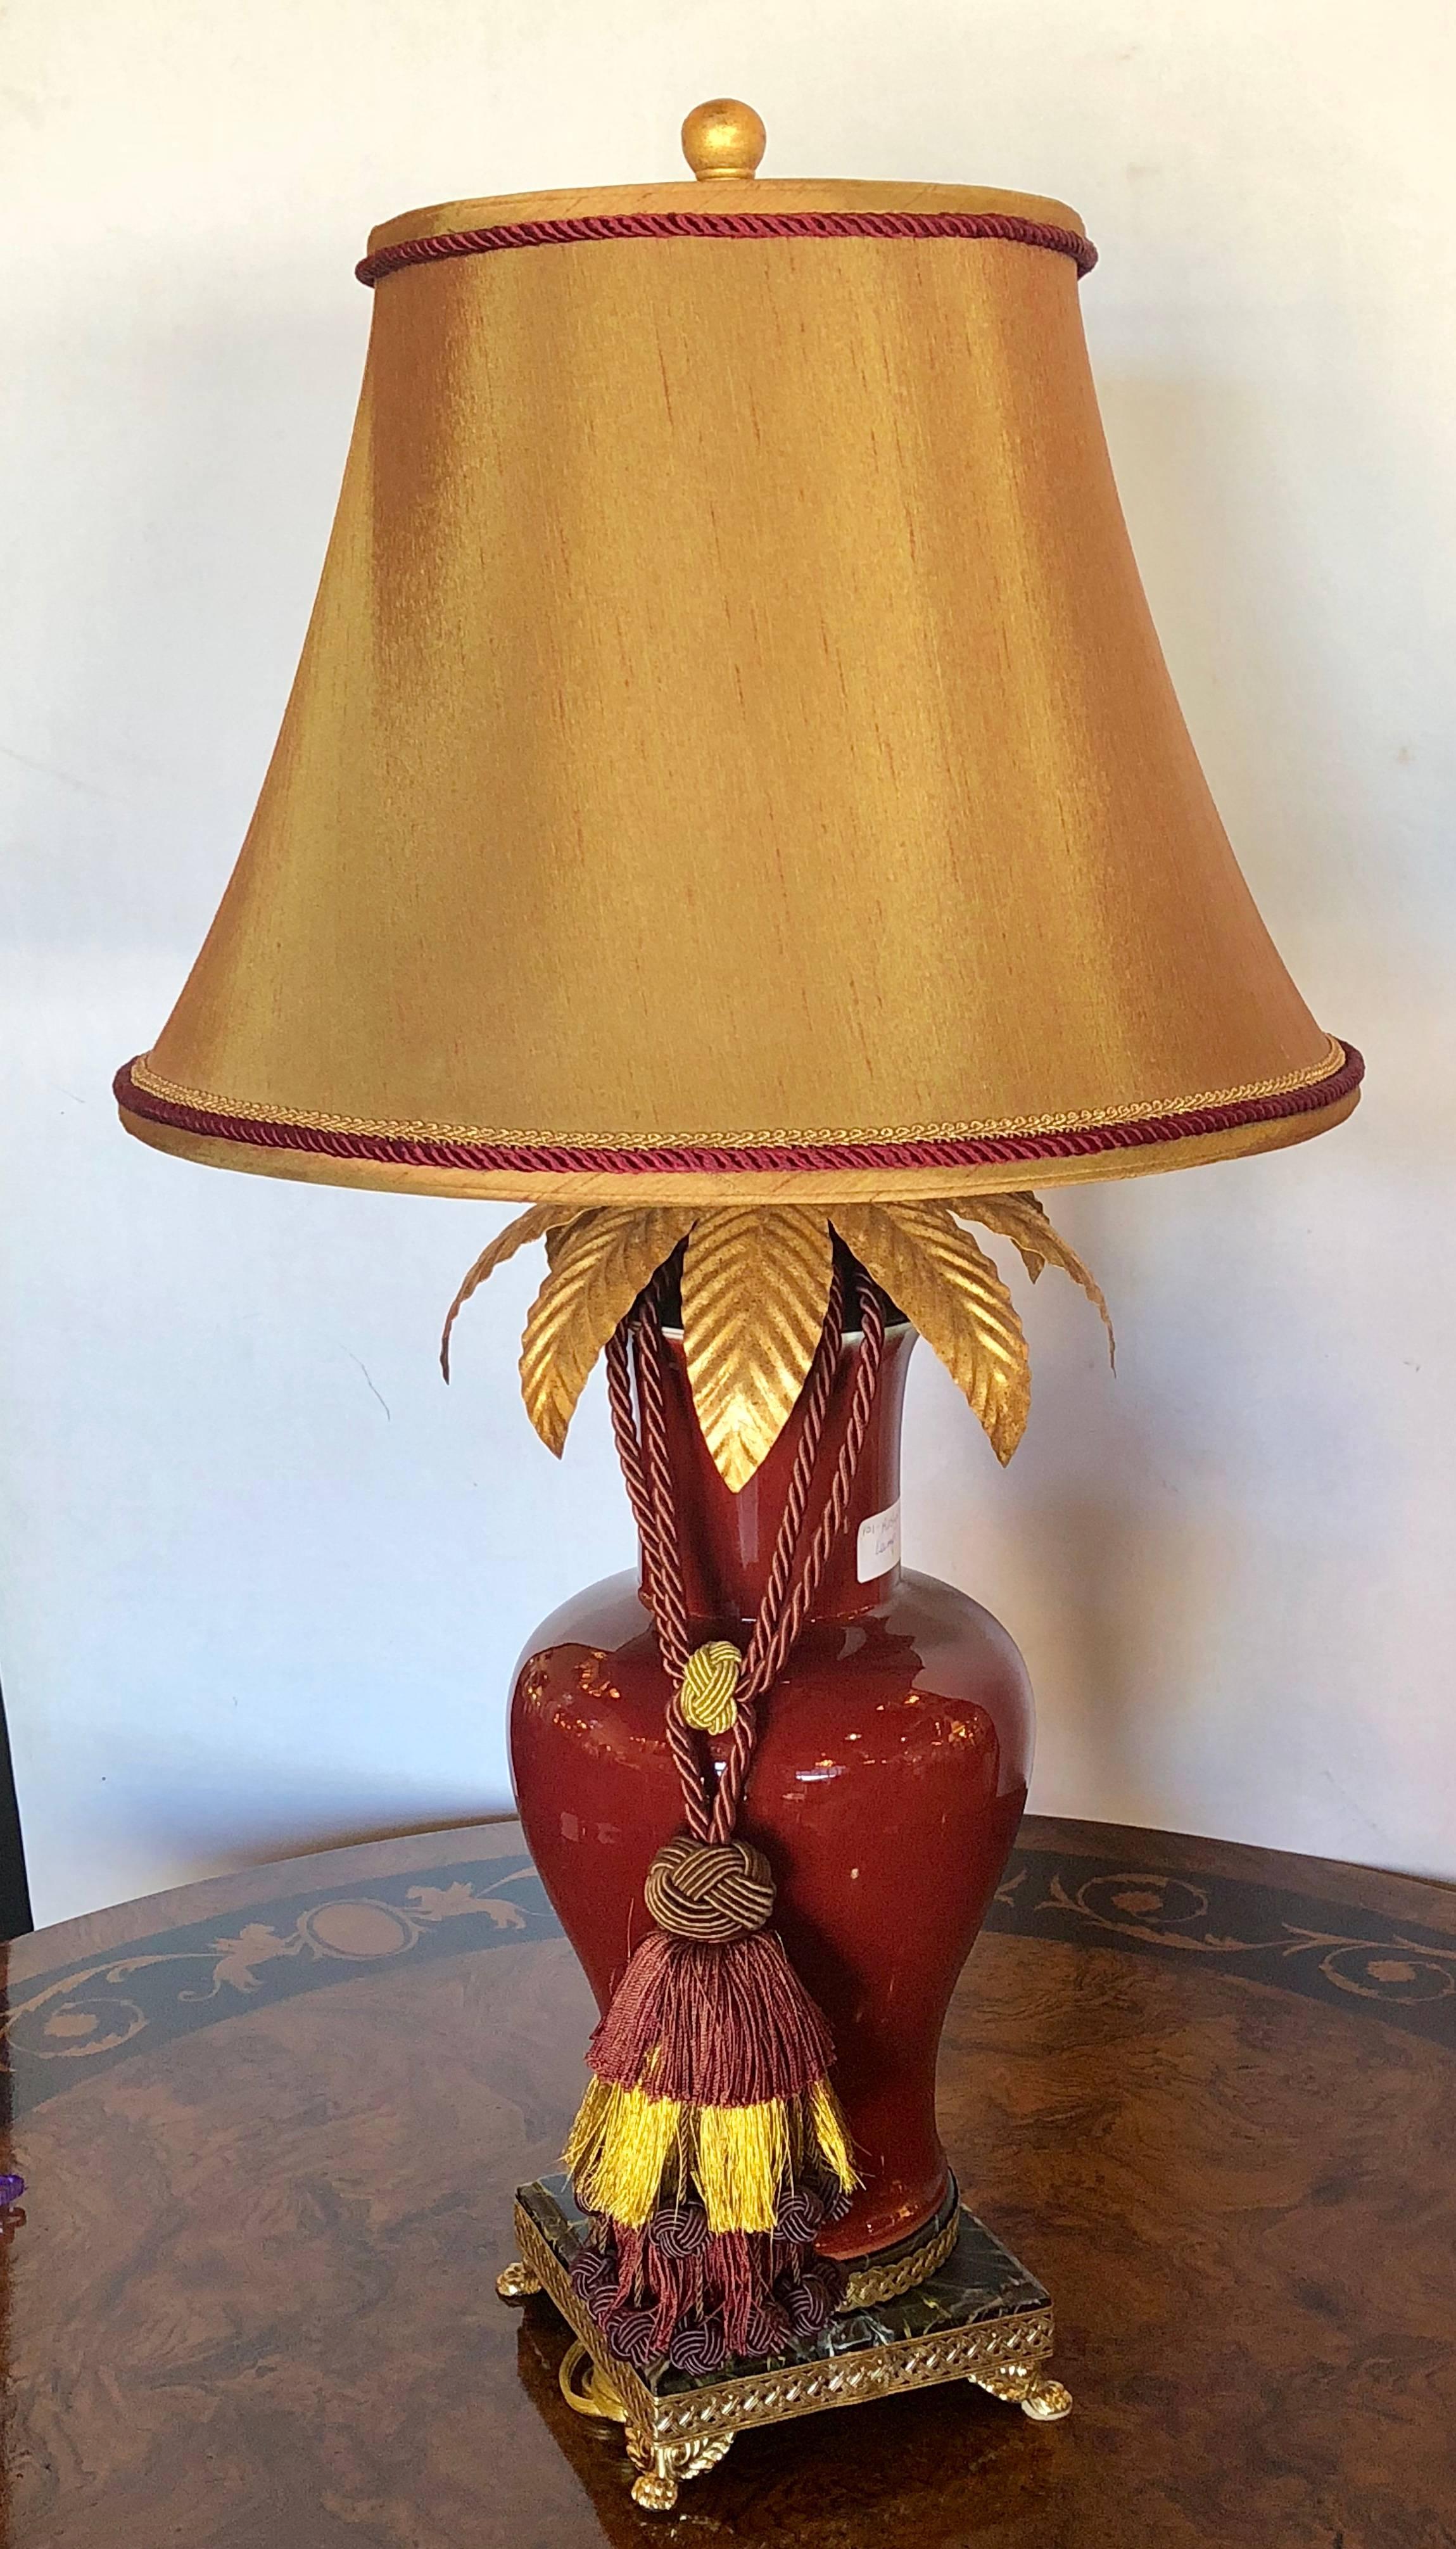 Ruby red Celedon single large table lamp by F. Cooper (signed). Vase measures 18 inches high. On claw feet with lace designed apron this table lamp brings the Hollywood Regency style and glamour to its peak. The red celedon porcelain vase now